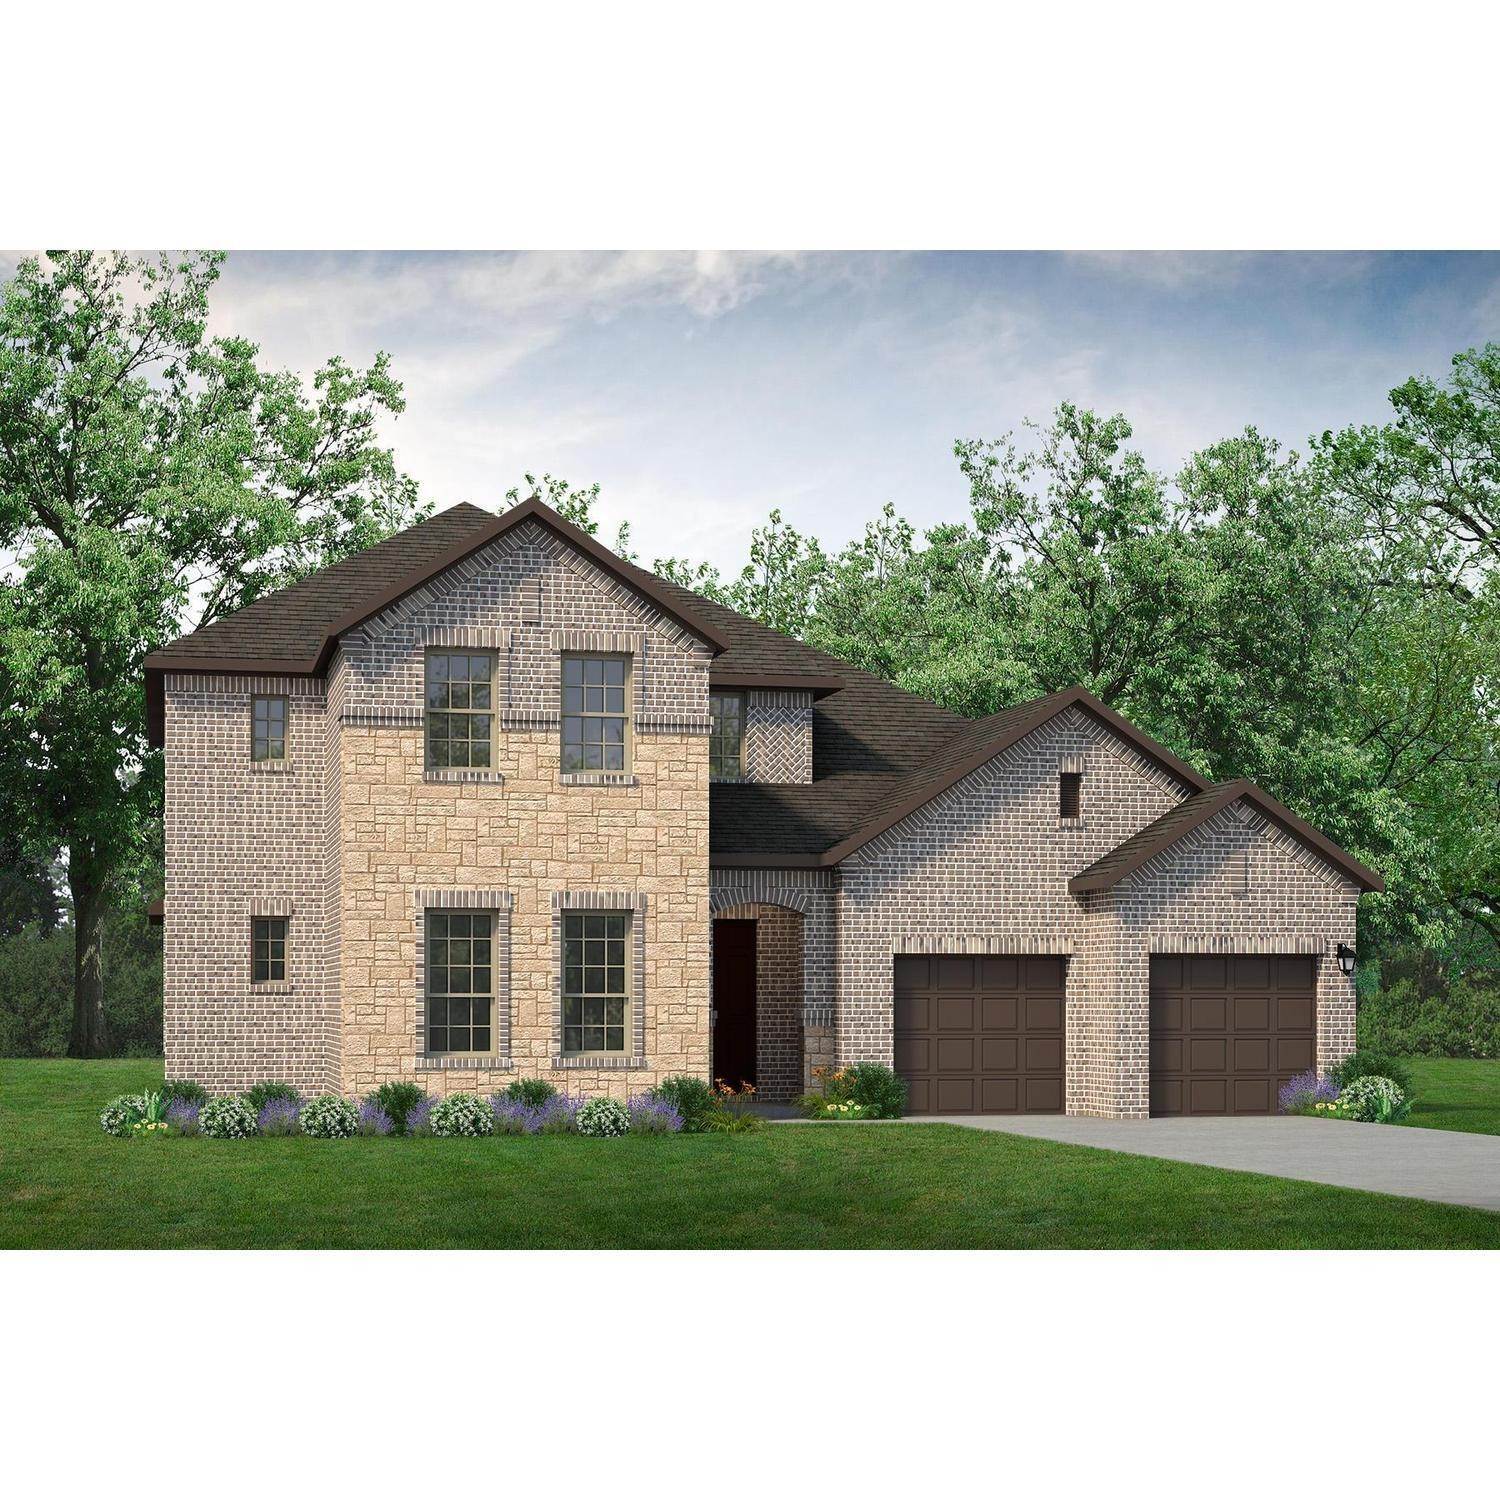 Single Family for Sale at Fate, TX 75087